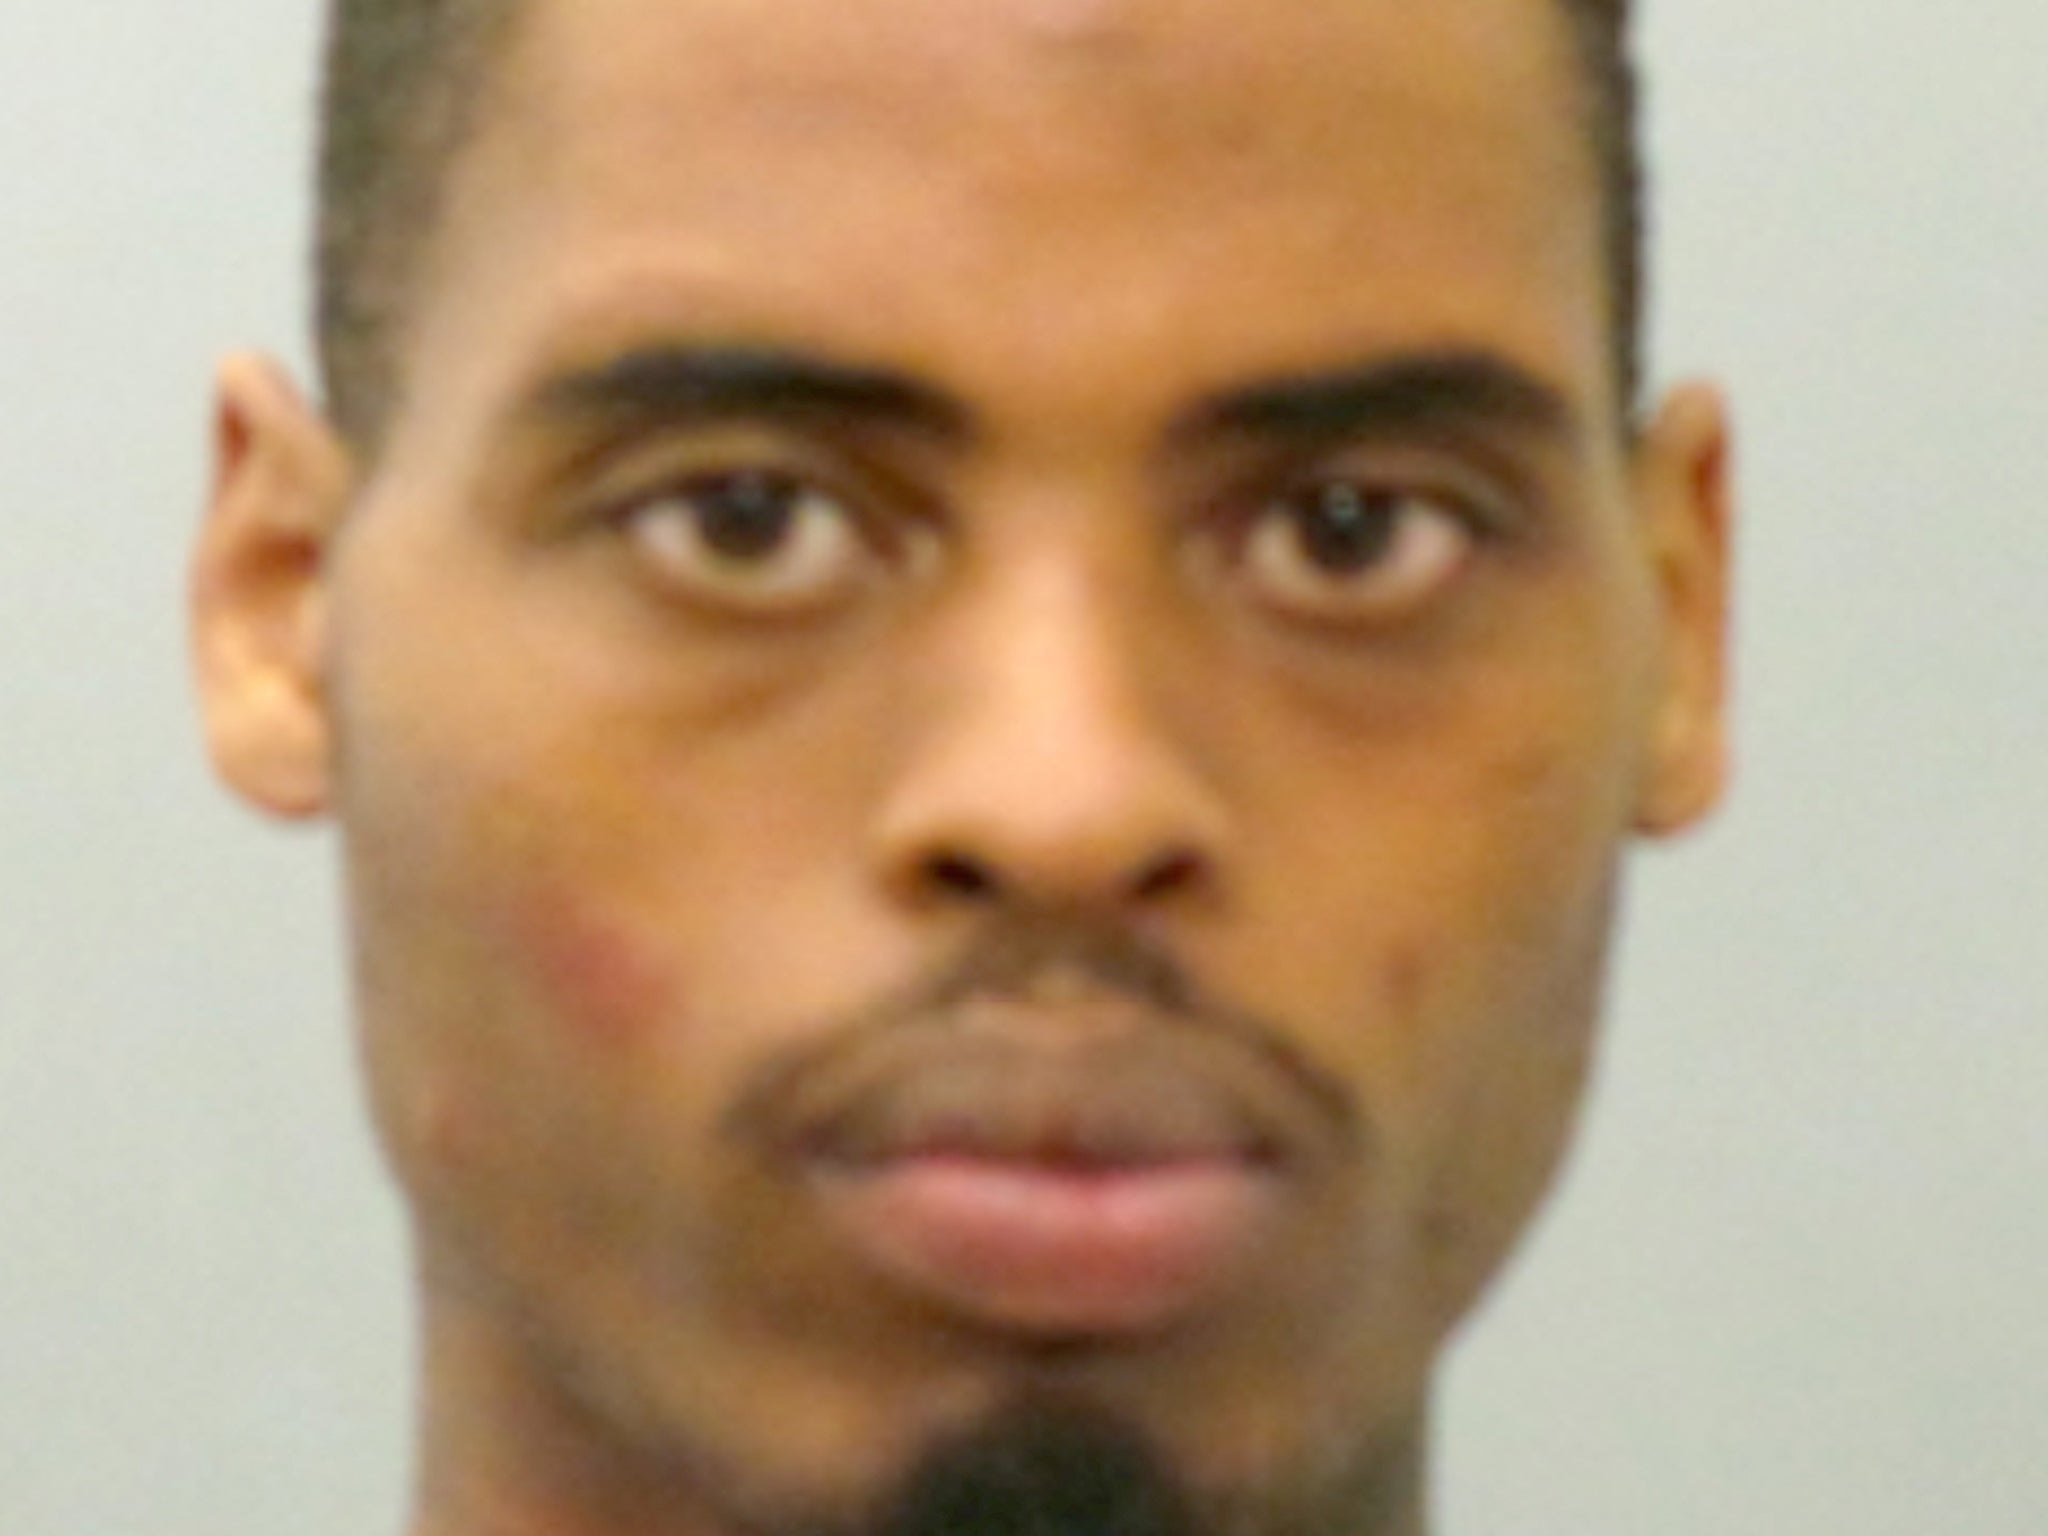 Jeffrey Williams has been charged with shooting two police officers